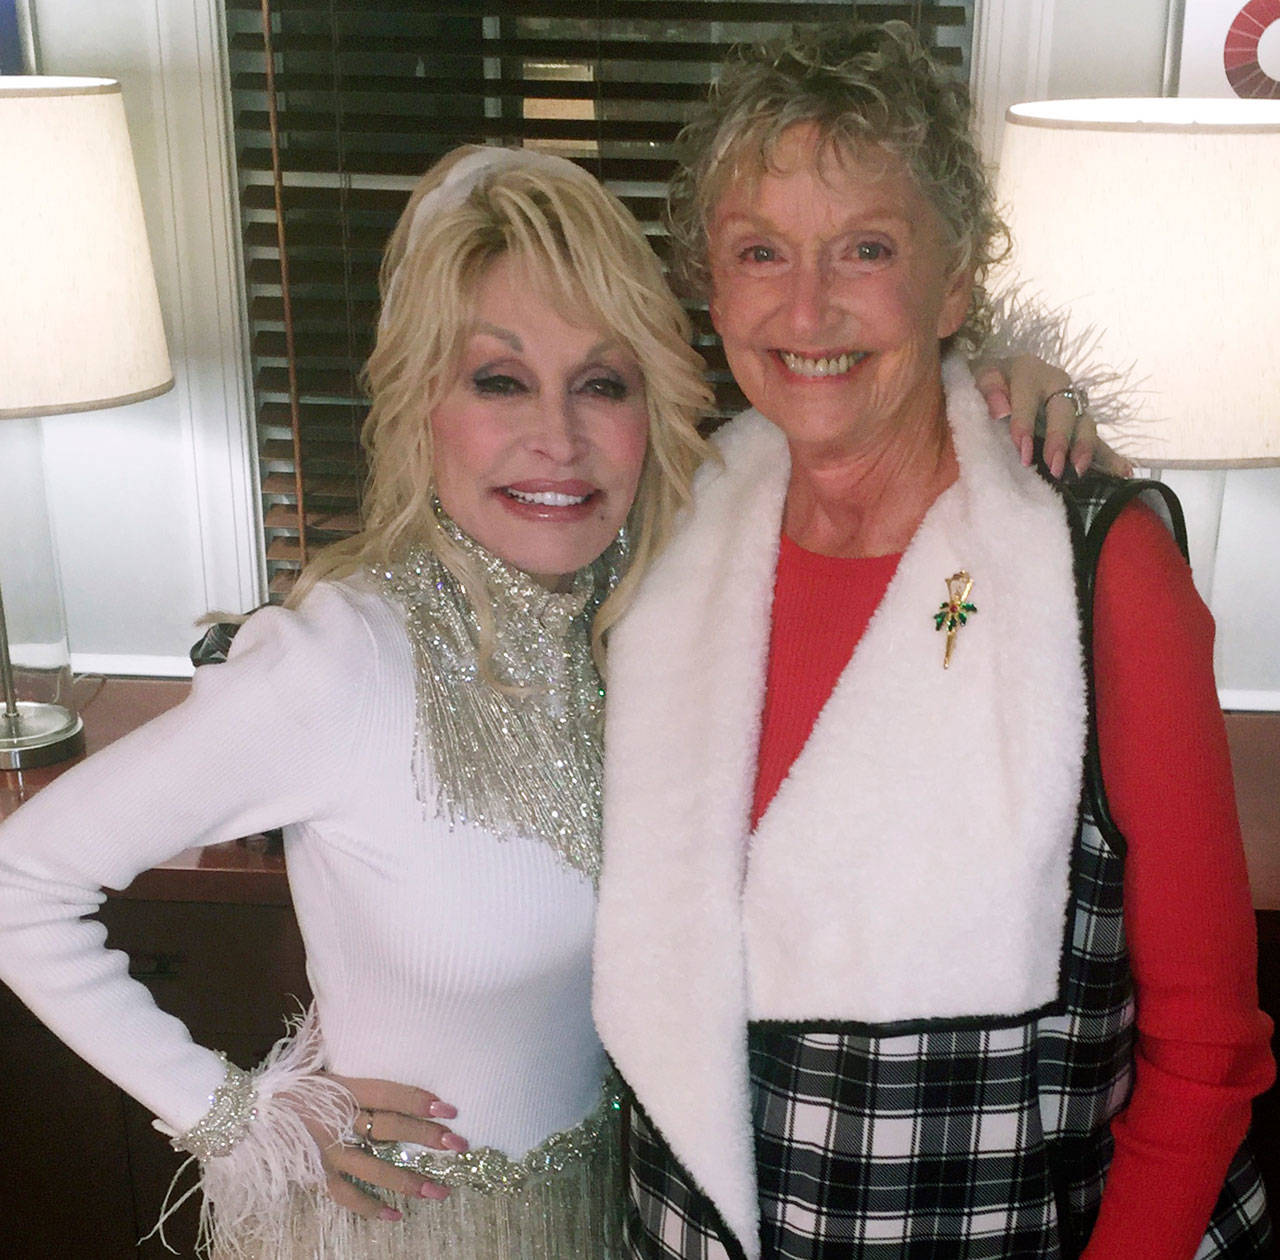 Singing and acting legend Dolly Parton shares a moment with fellow cast member Carol Swarbrick Dries on the set of “Christmas on the Square.” Filmed in the summer of 2019, the show made its debut Nov. 22, 2020, on Netflix. Photo courtesy of Carol Swarbrick Dries